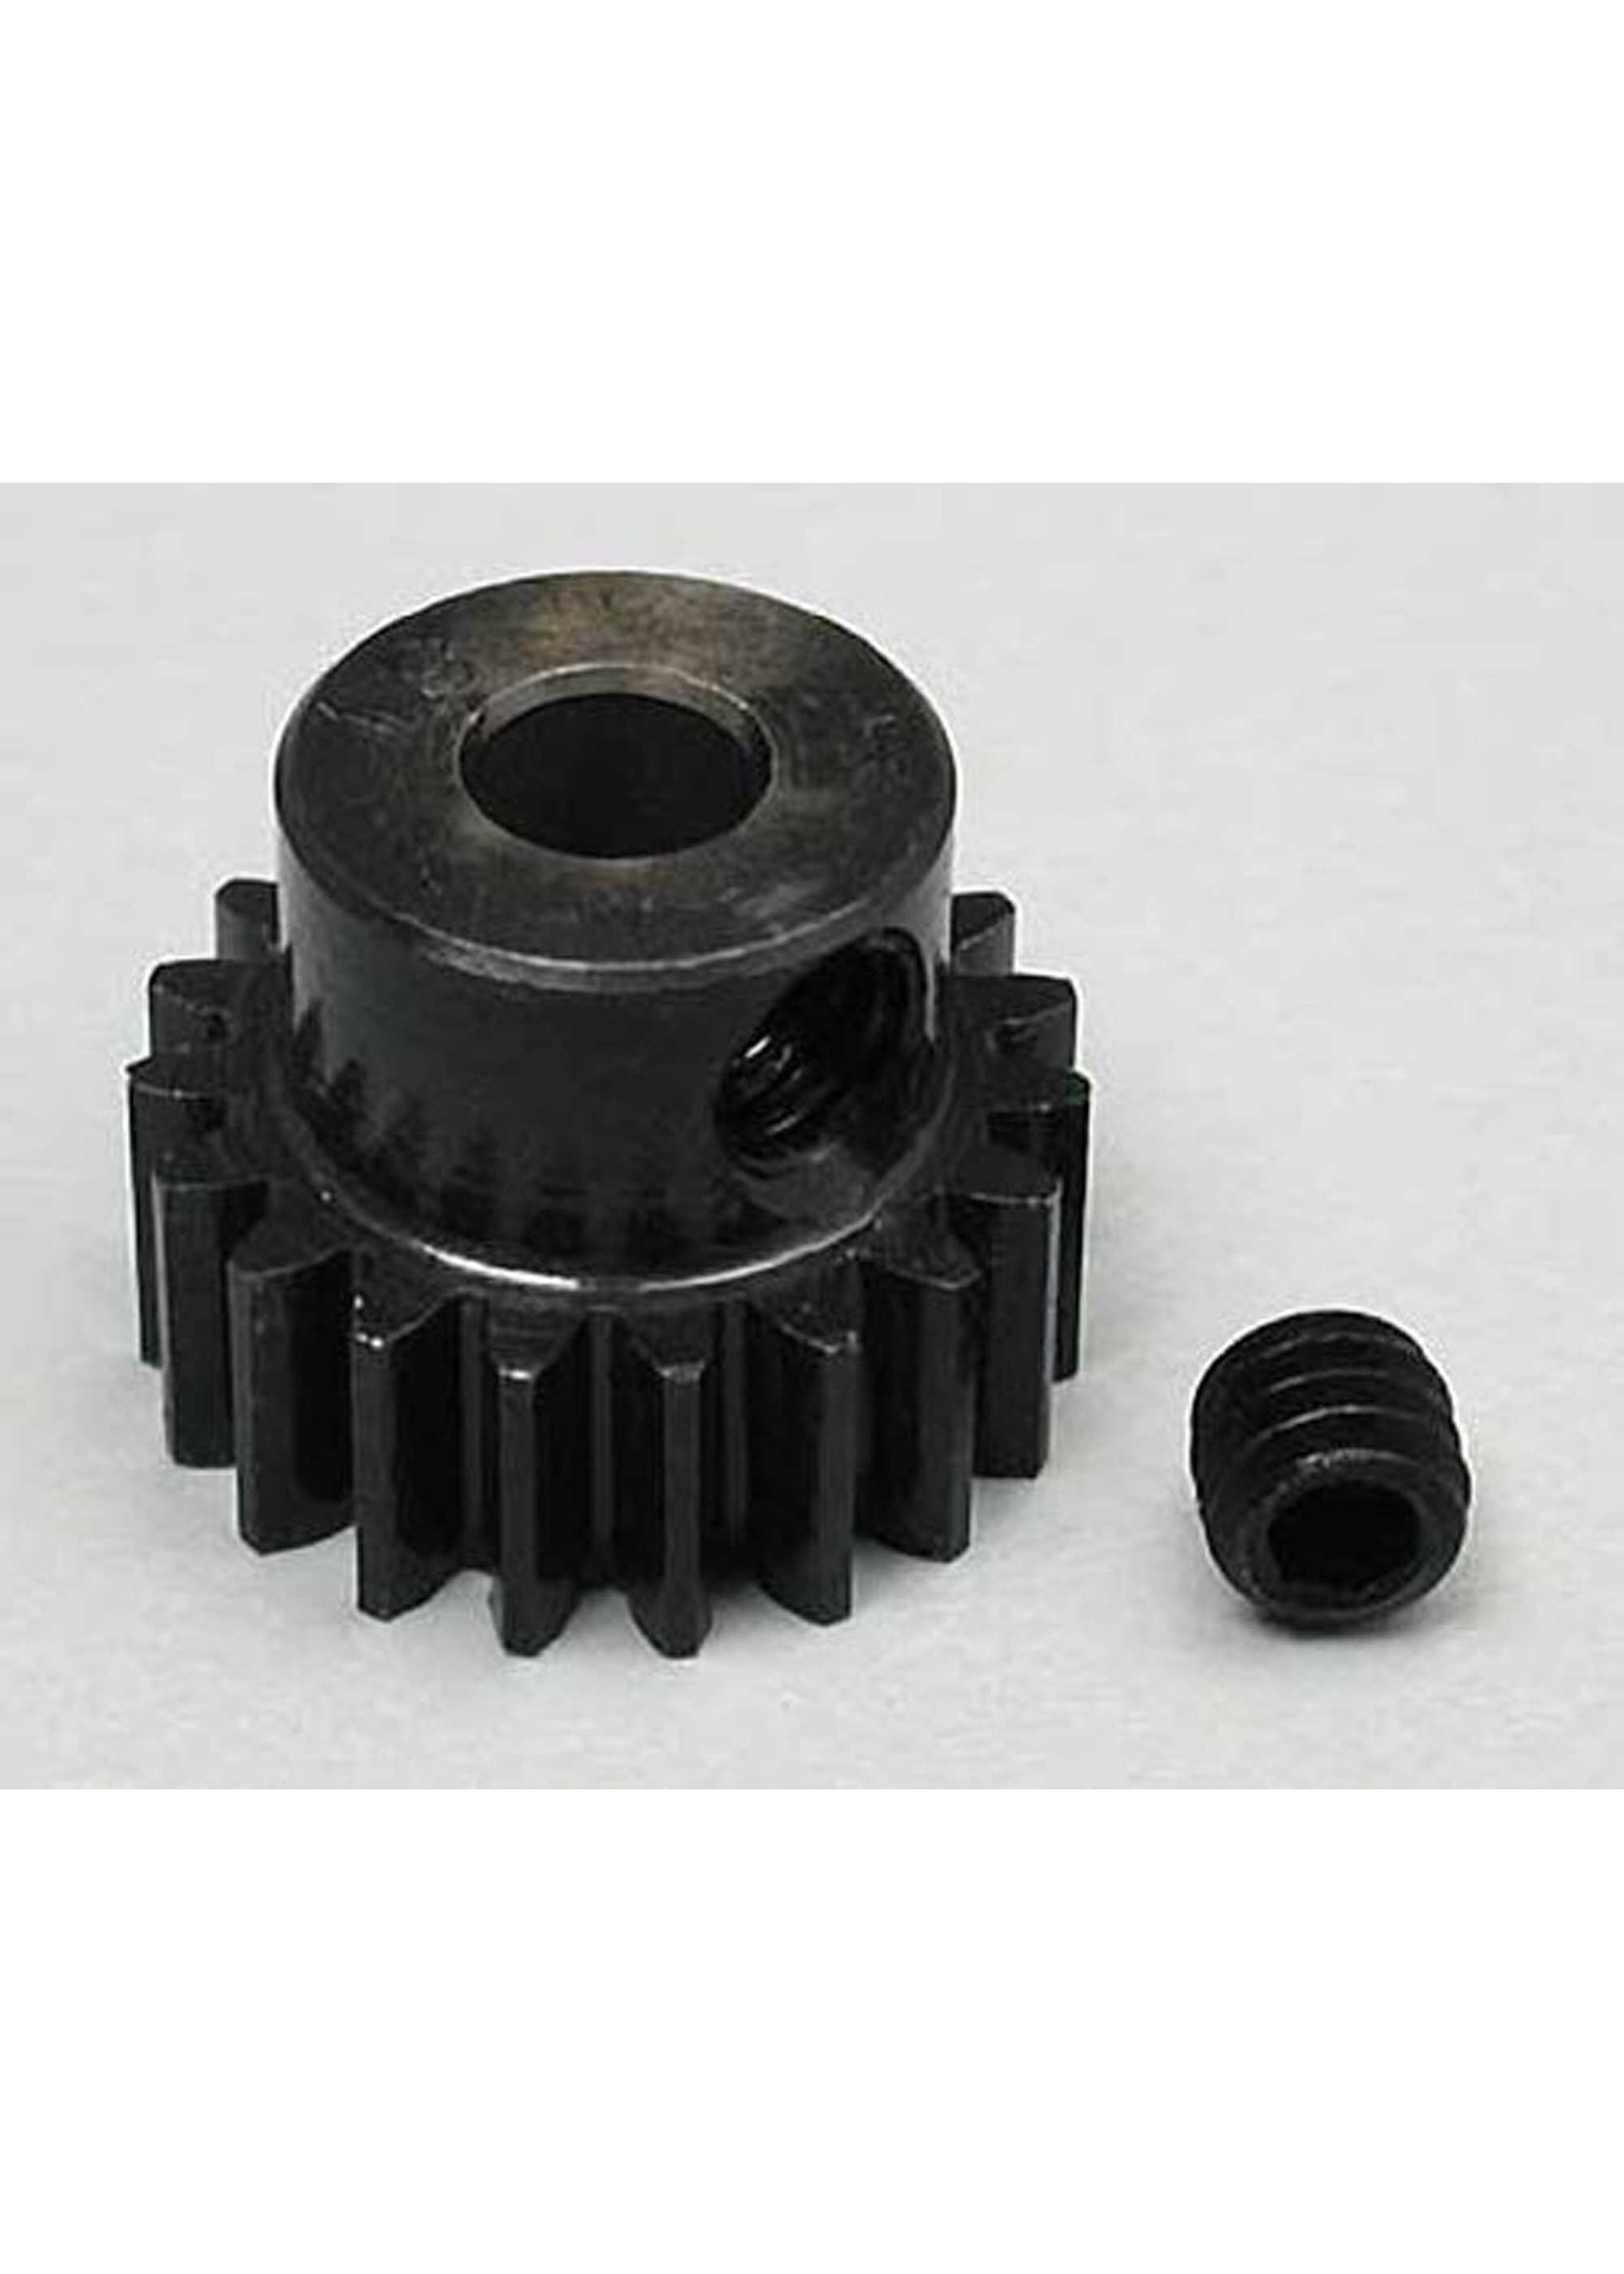 Robinson Racing Products RRP1419 Robinson Racing Products Super Hard ''Absolute'' 48P Steel Pinion Gear (19T)